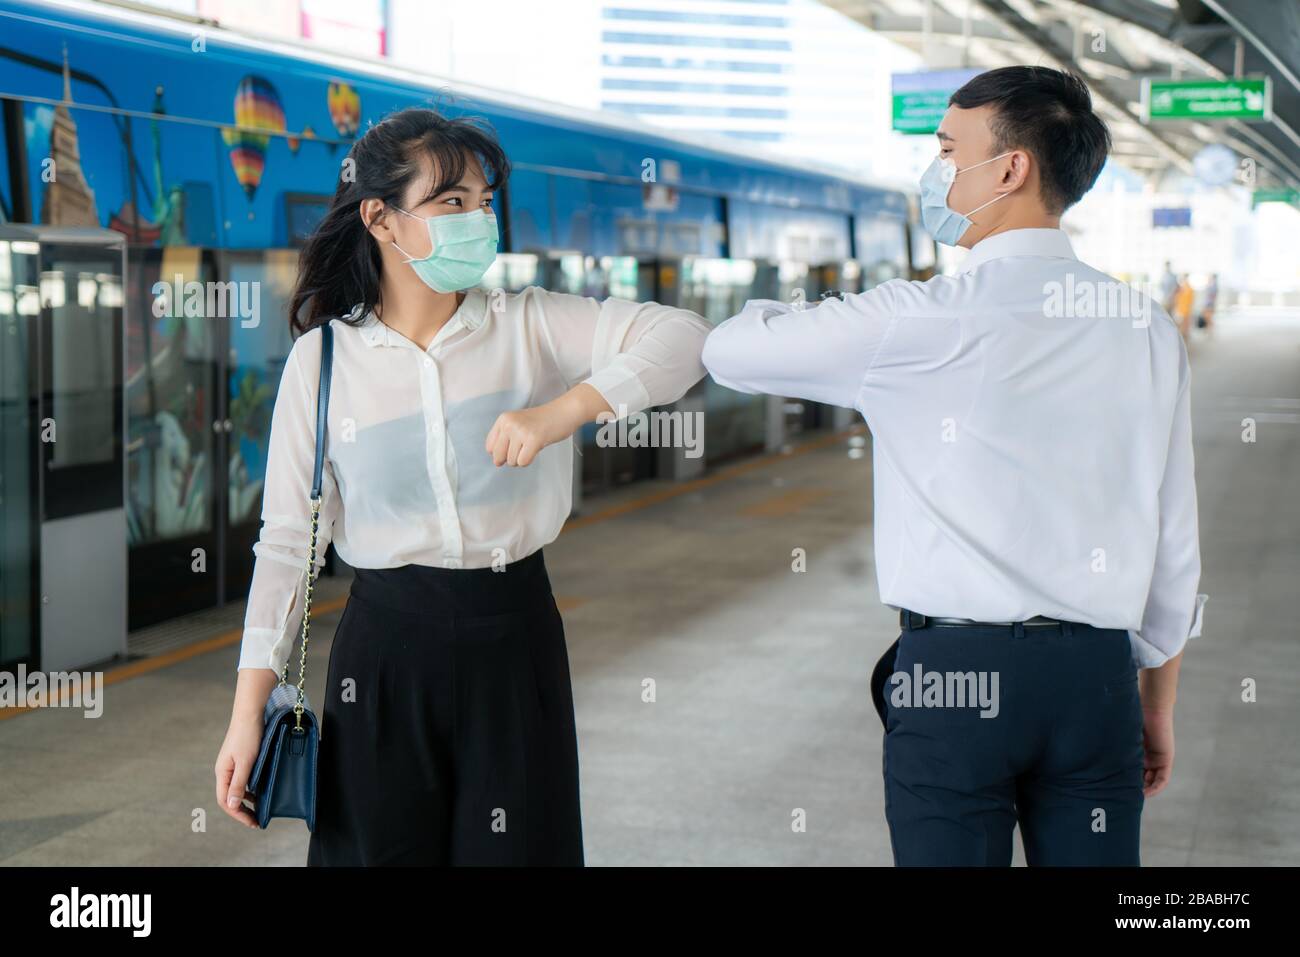 Elbow bump is new novel greeting to avoid the spread of coronavirus. Two Asian business friends meet in subway station. Instead of greeting with a hug Stock Photo